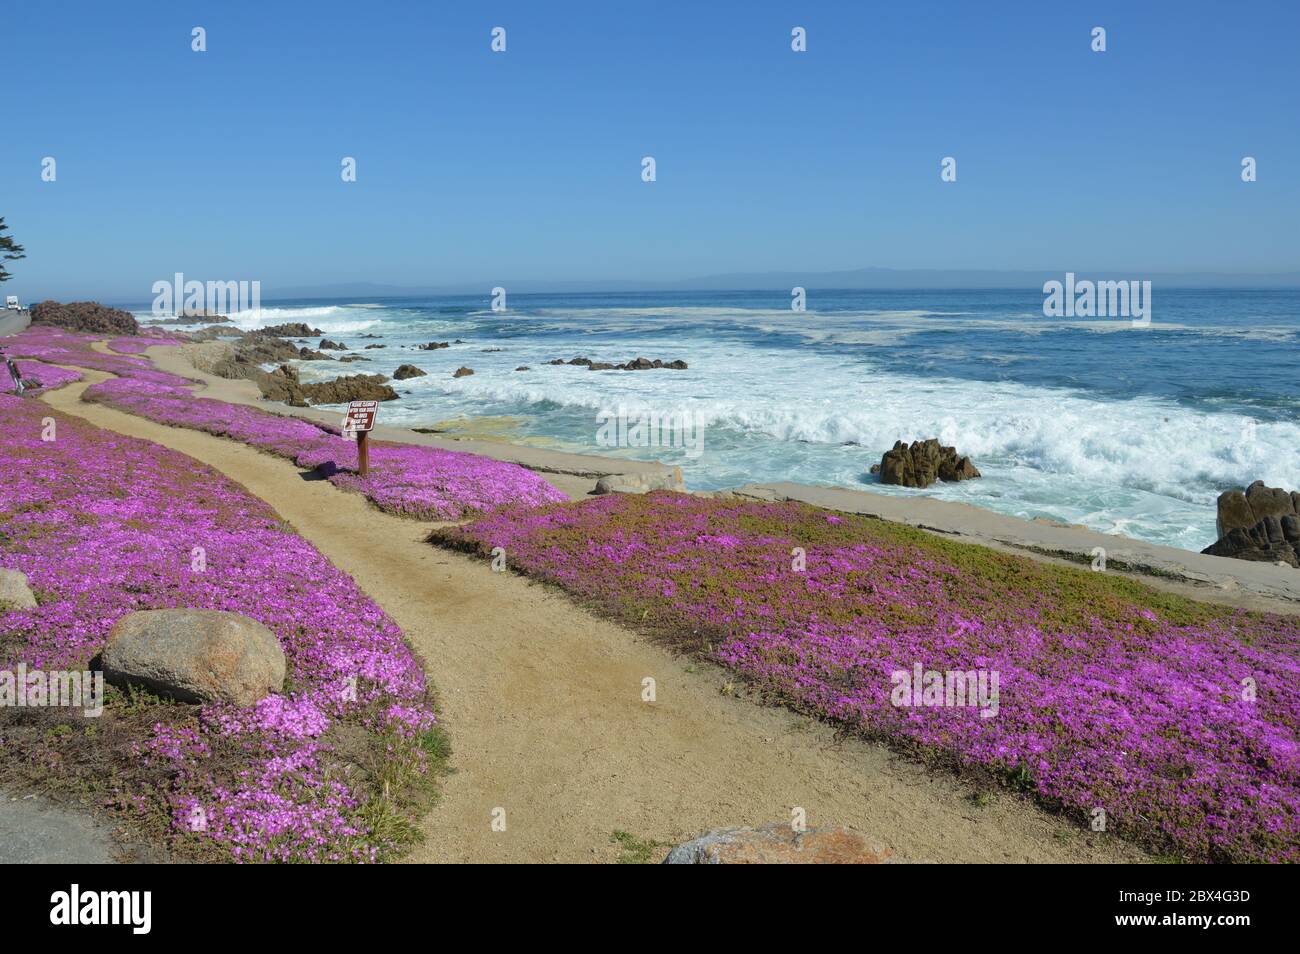 beauitful landscape with violet flowers and high ocean waves in California Stock Photo